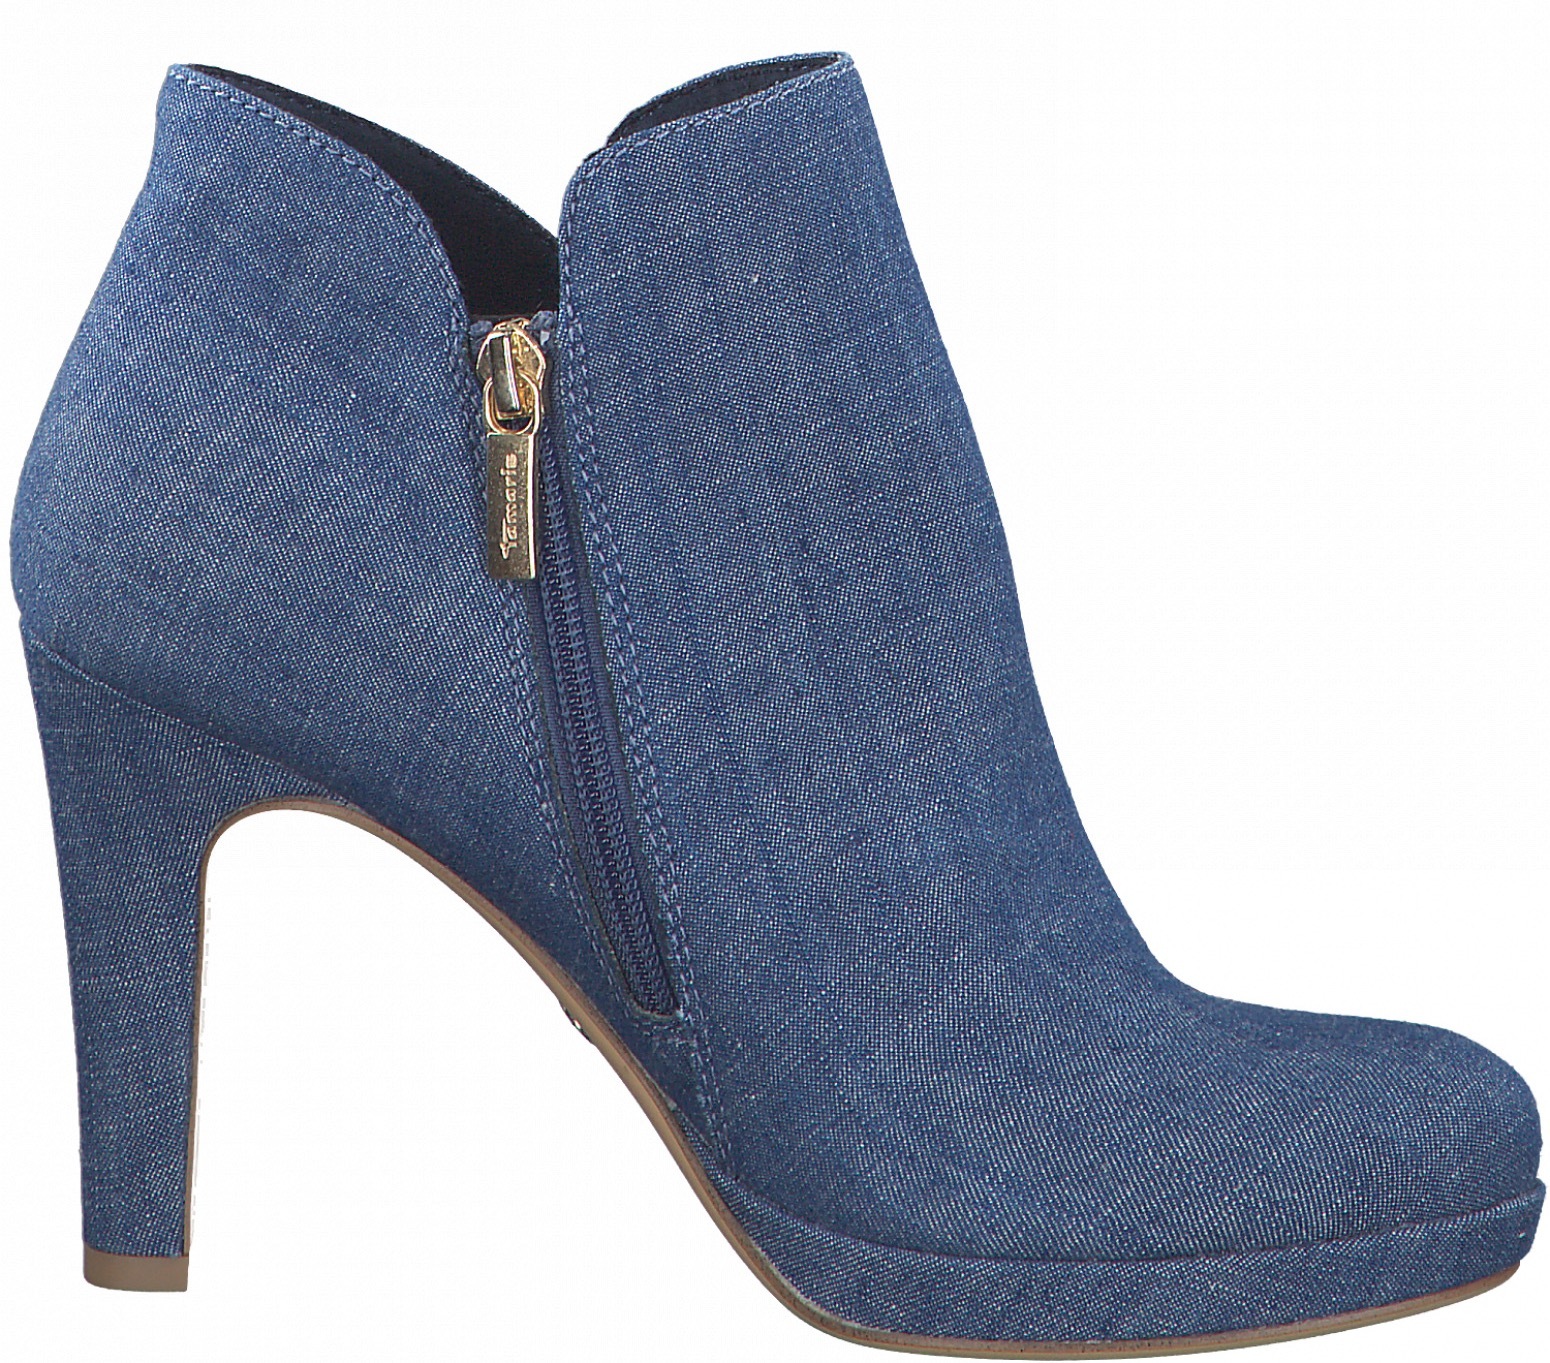 High-Heels Ankle Boots im Jeans Look